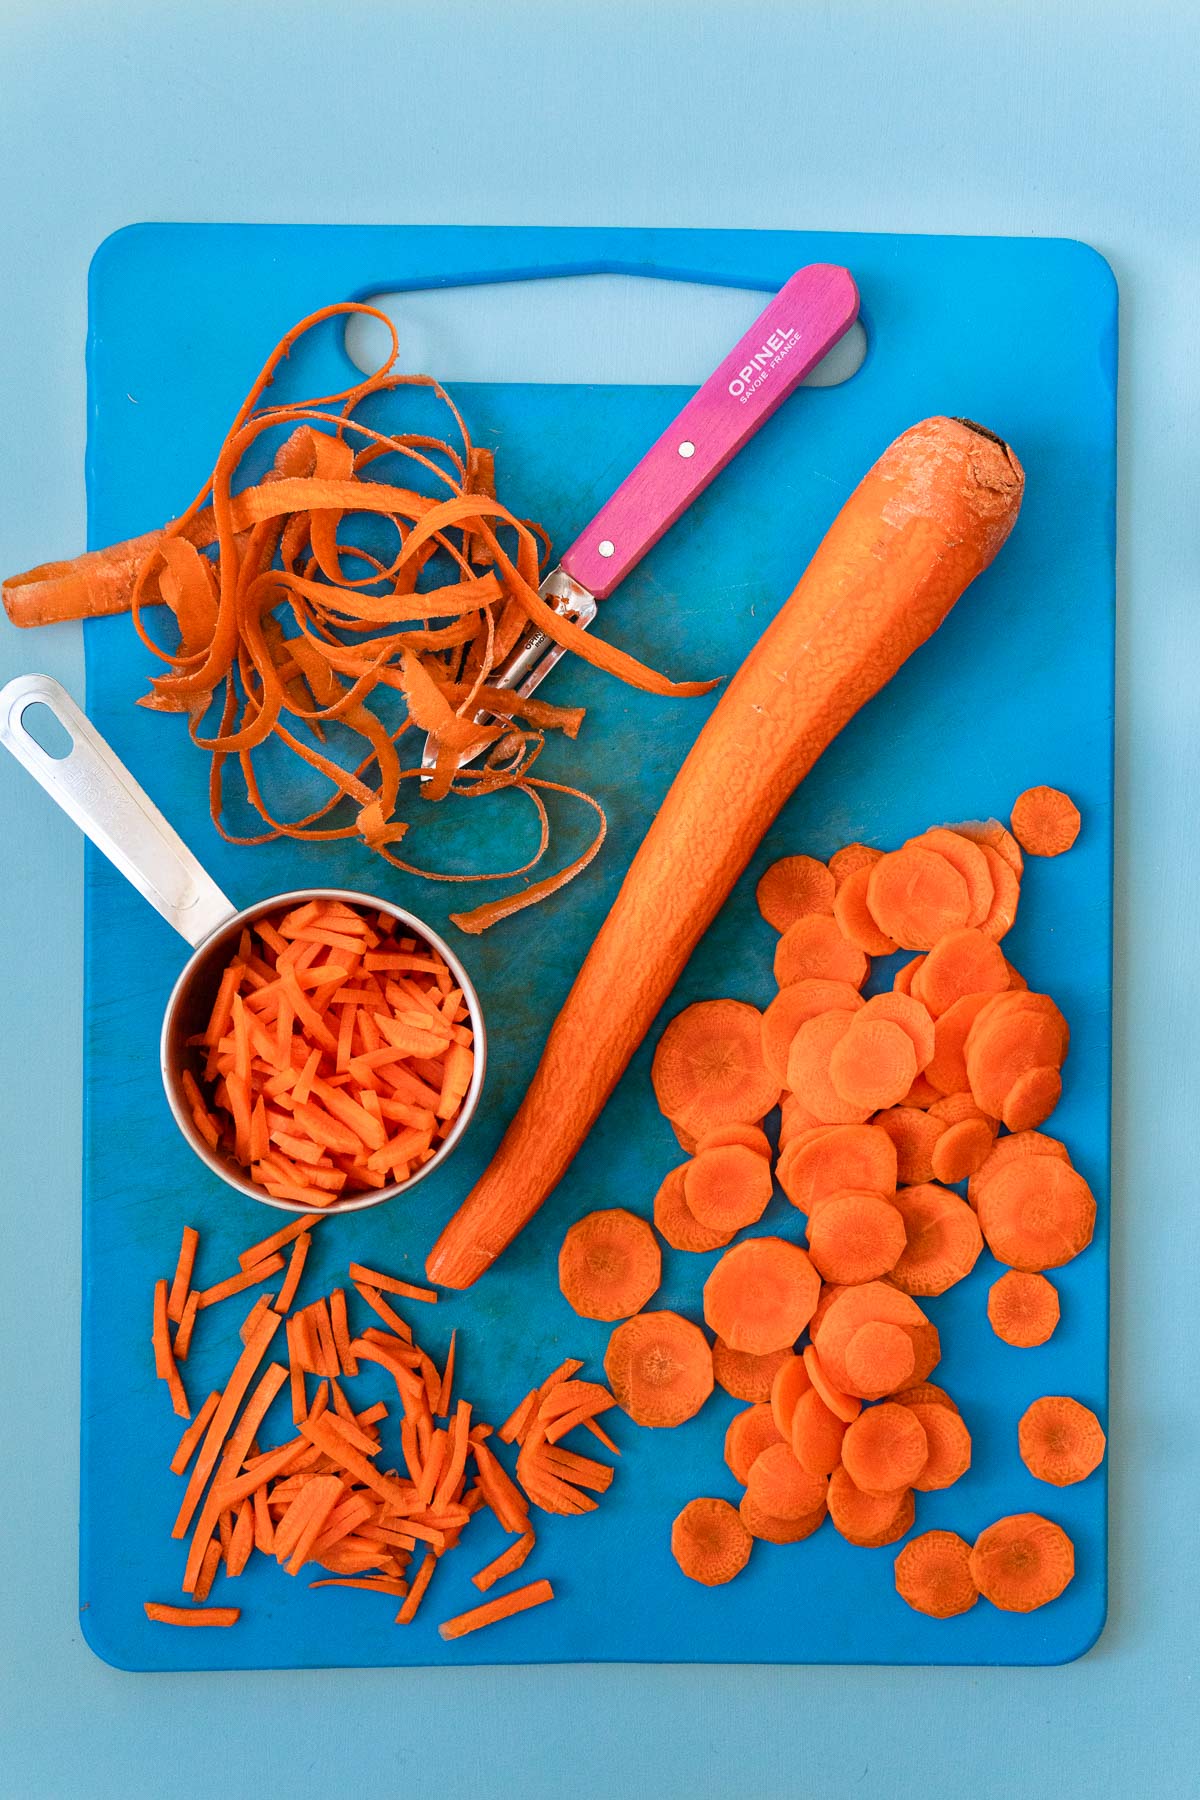 Carrots on a blue cutting board